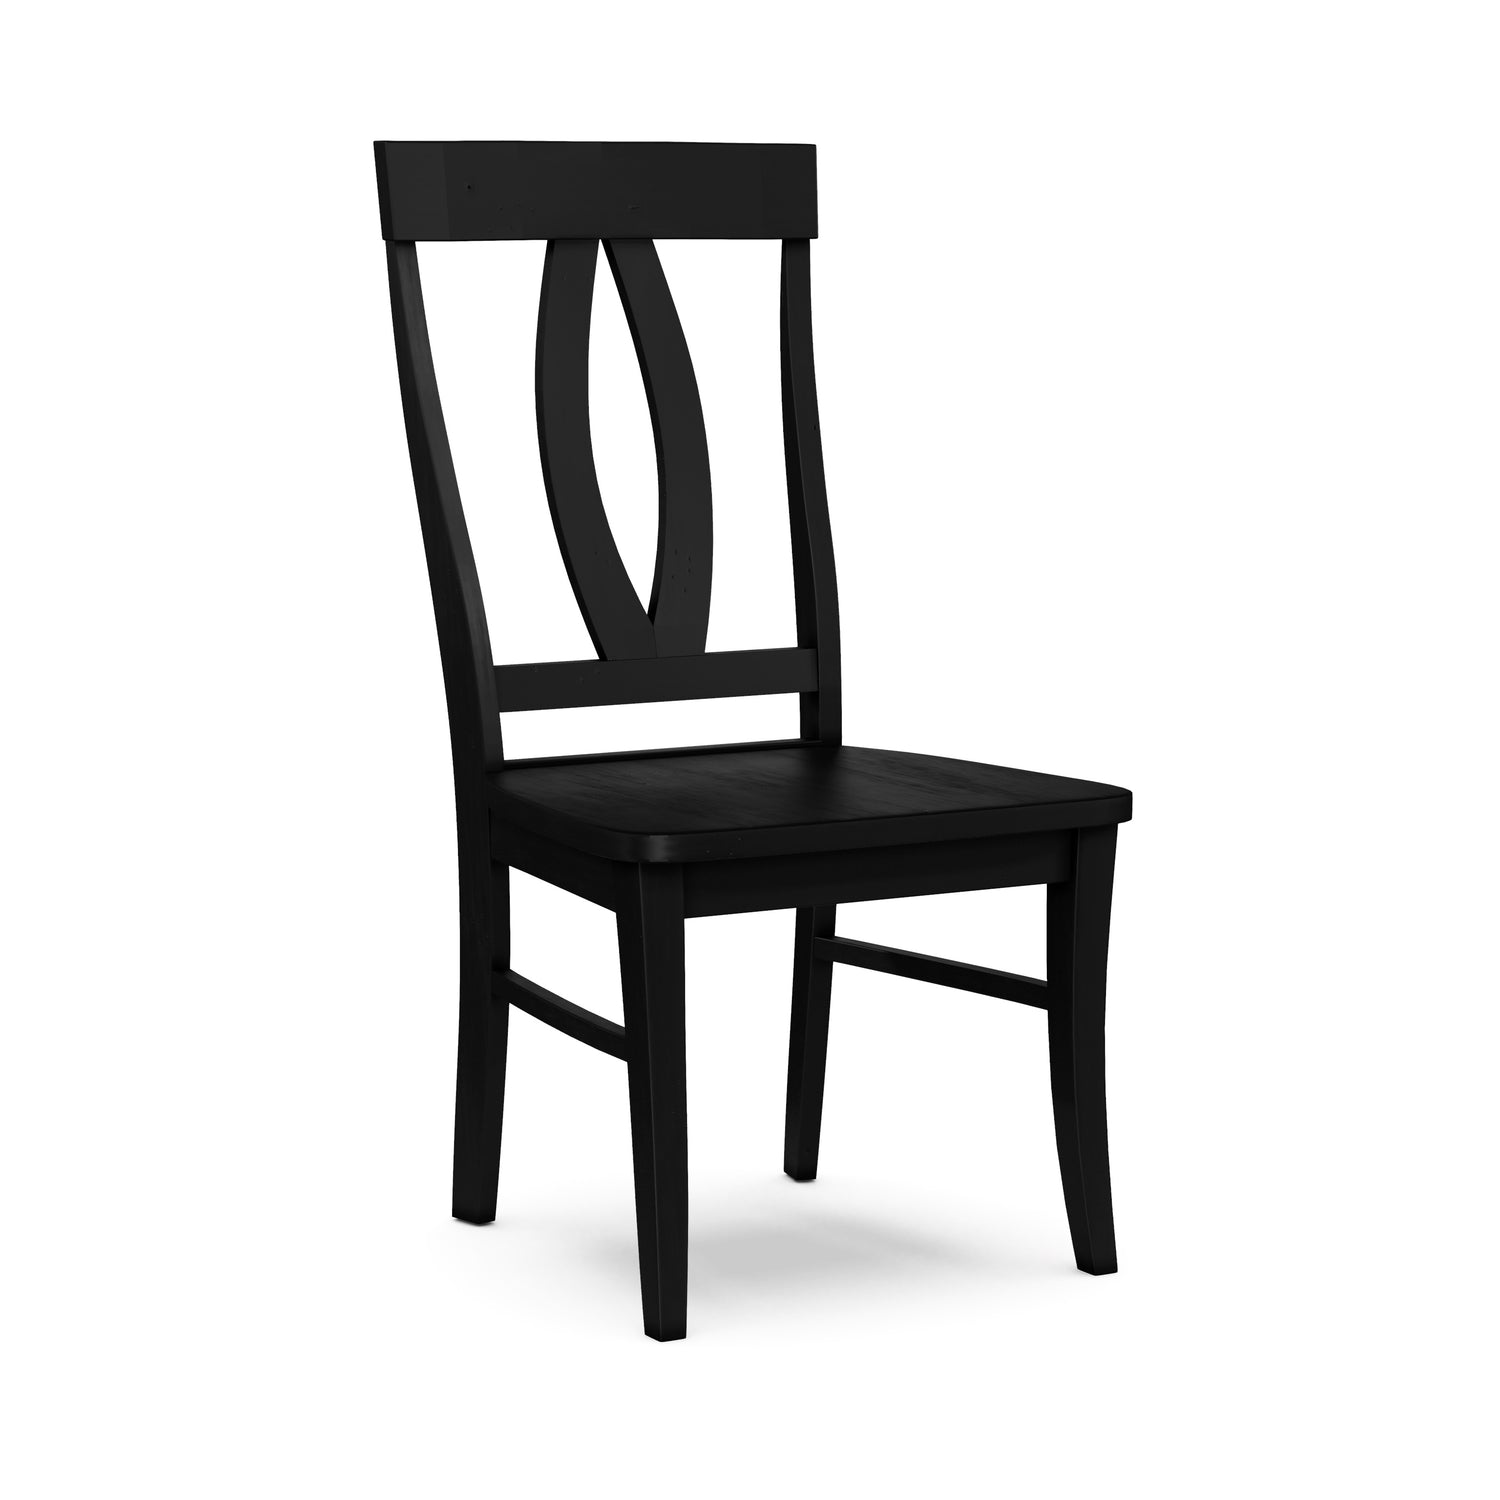 The Olivia Dining Chair